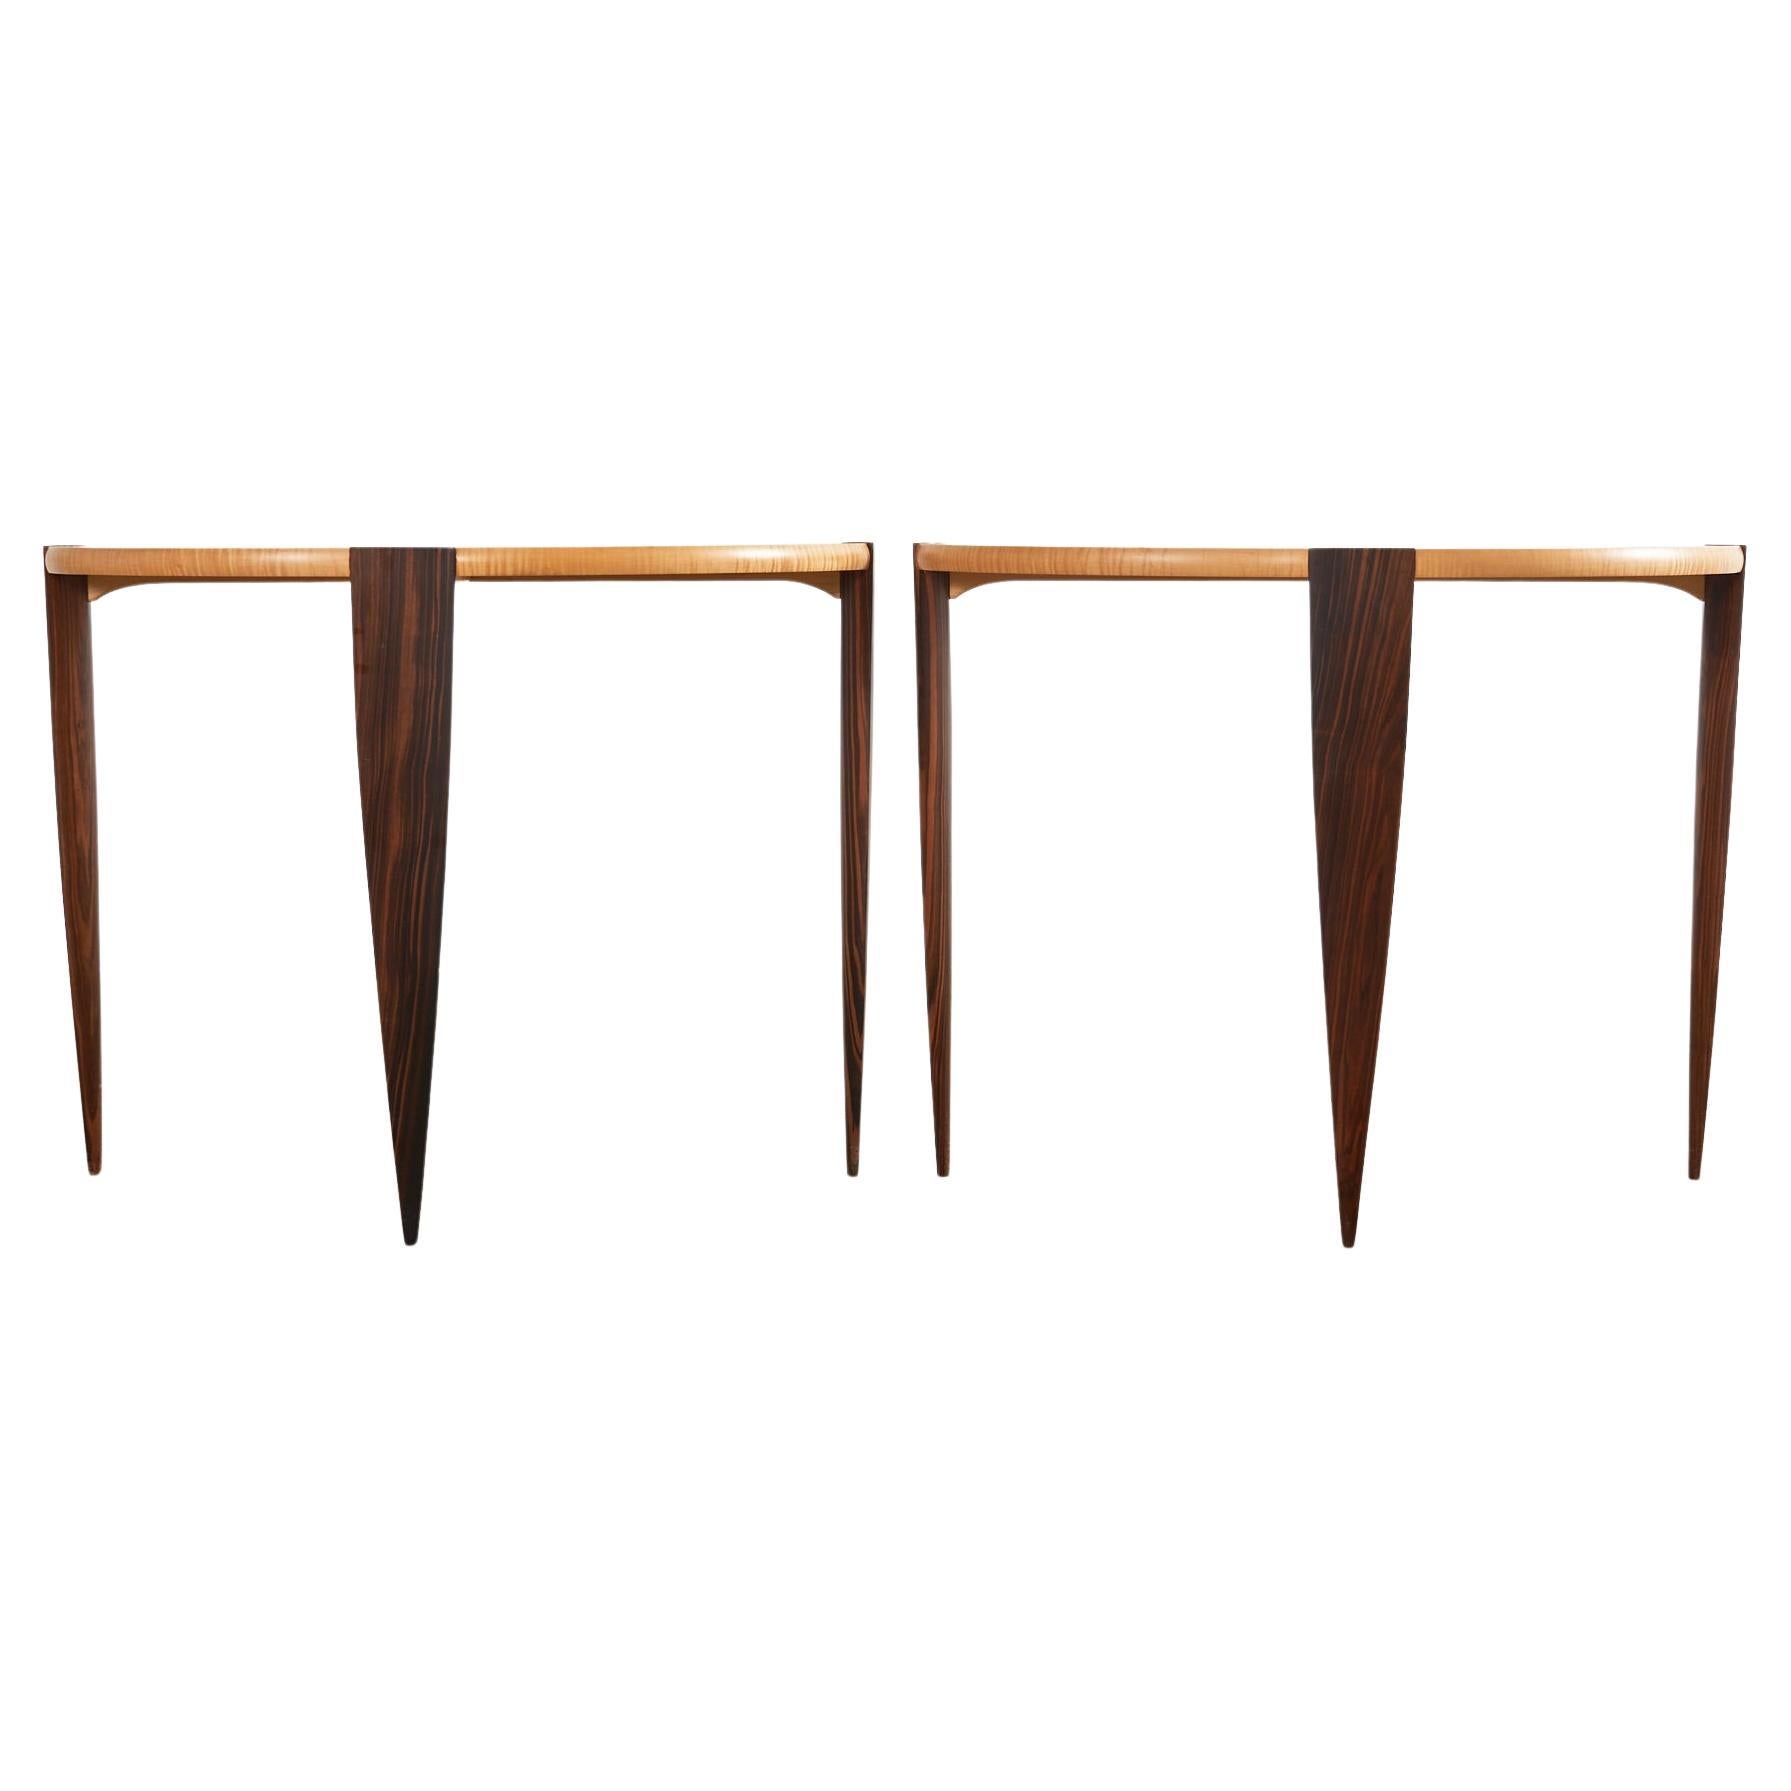 Pair of Post Modern Ebony and Birch Demilune Console Tables For Sale